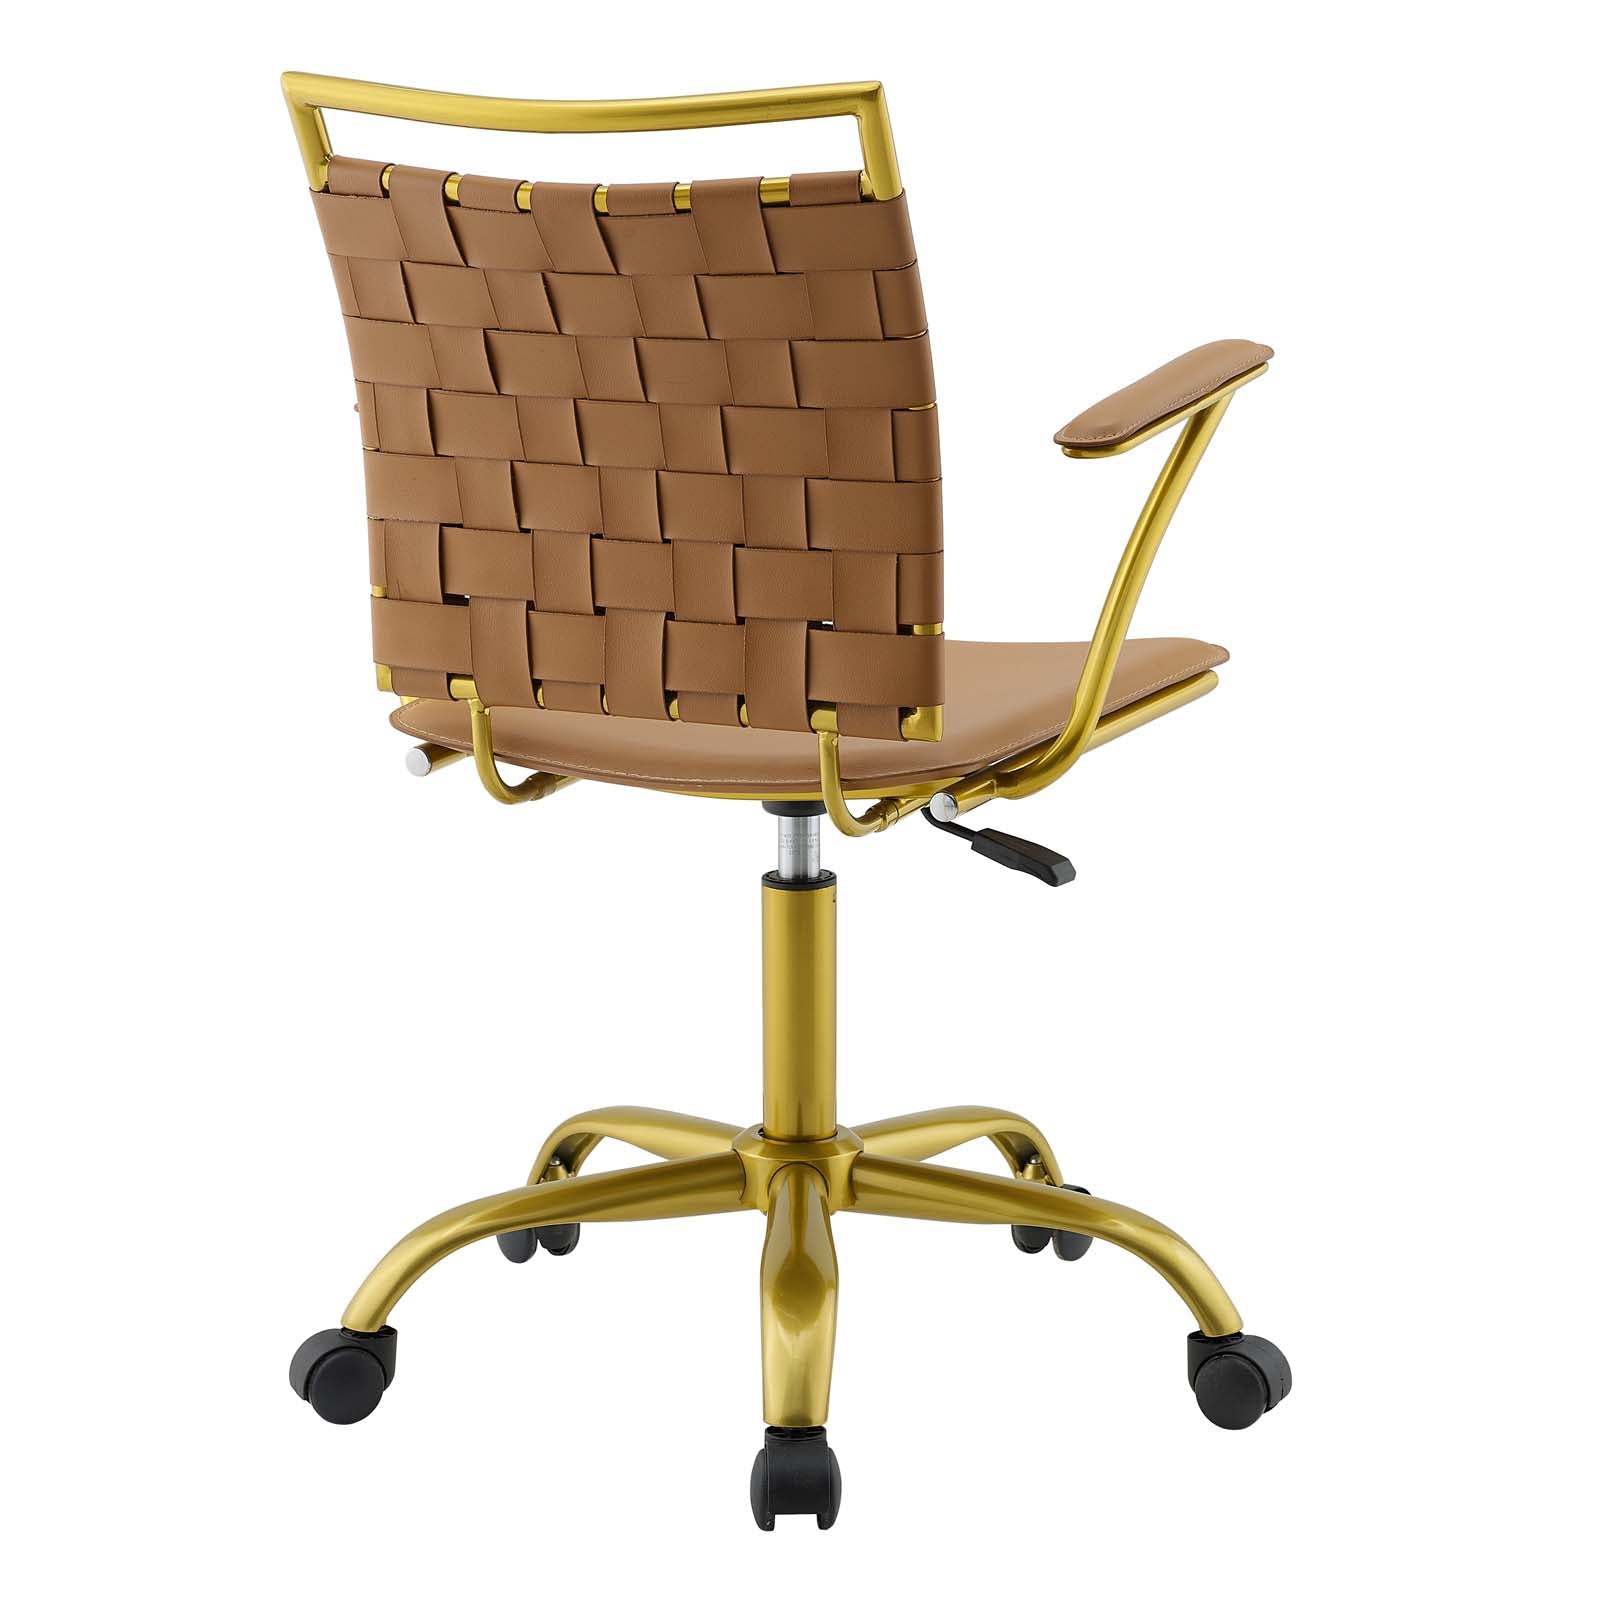 Fuse Gold Faux Leather Office Chair - Tan